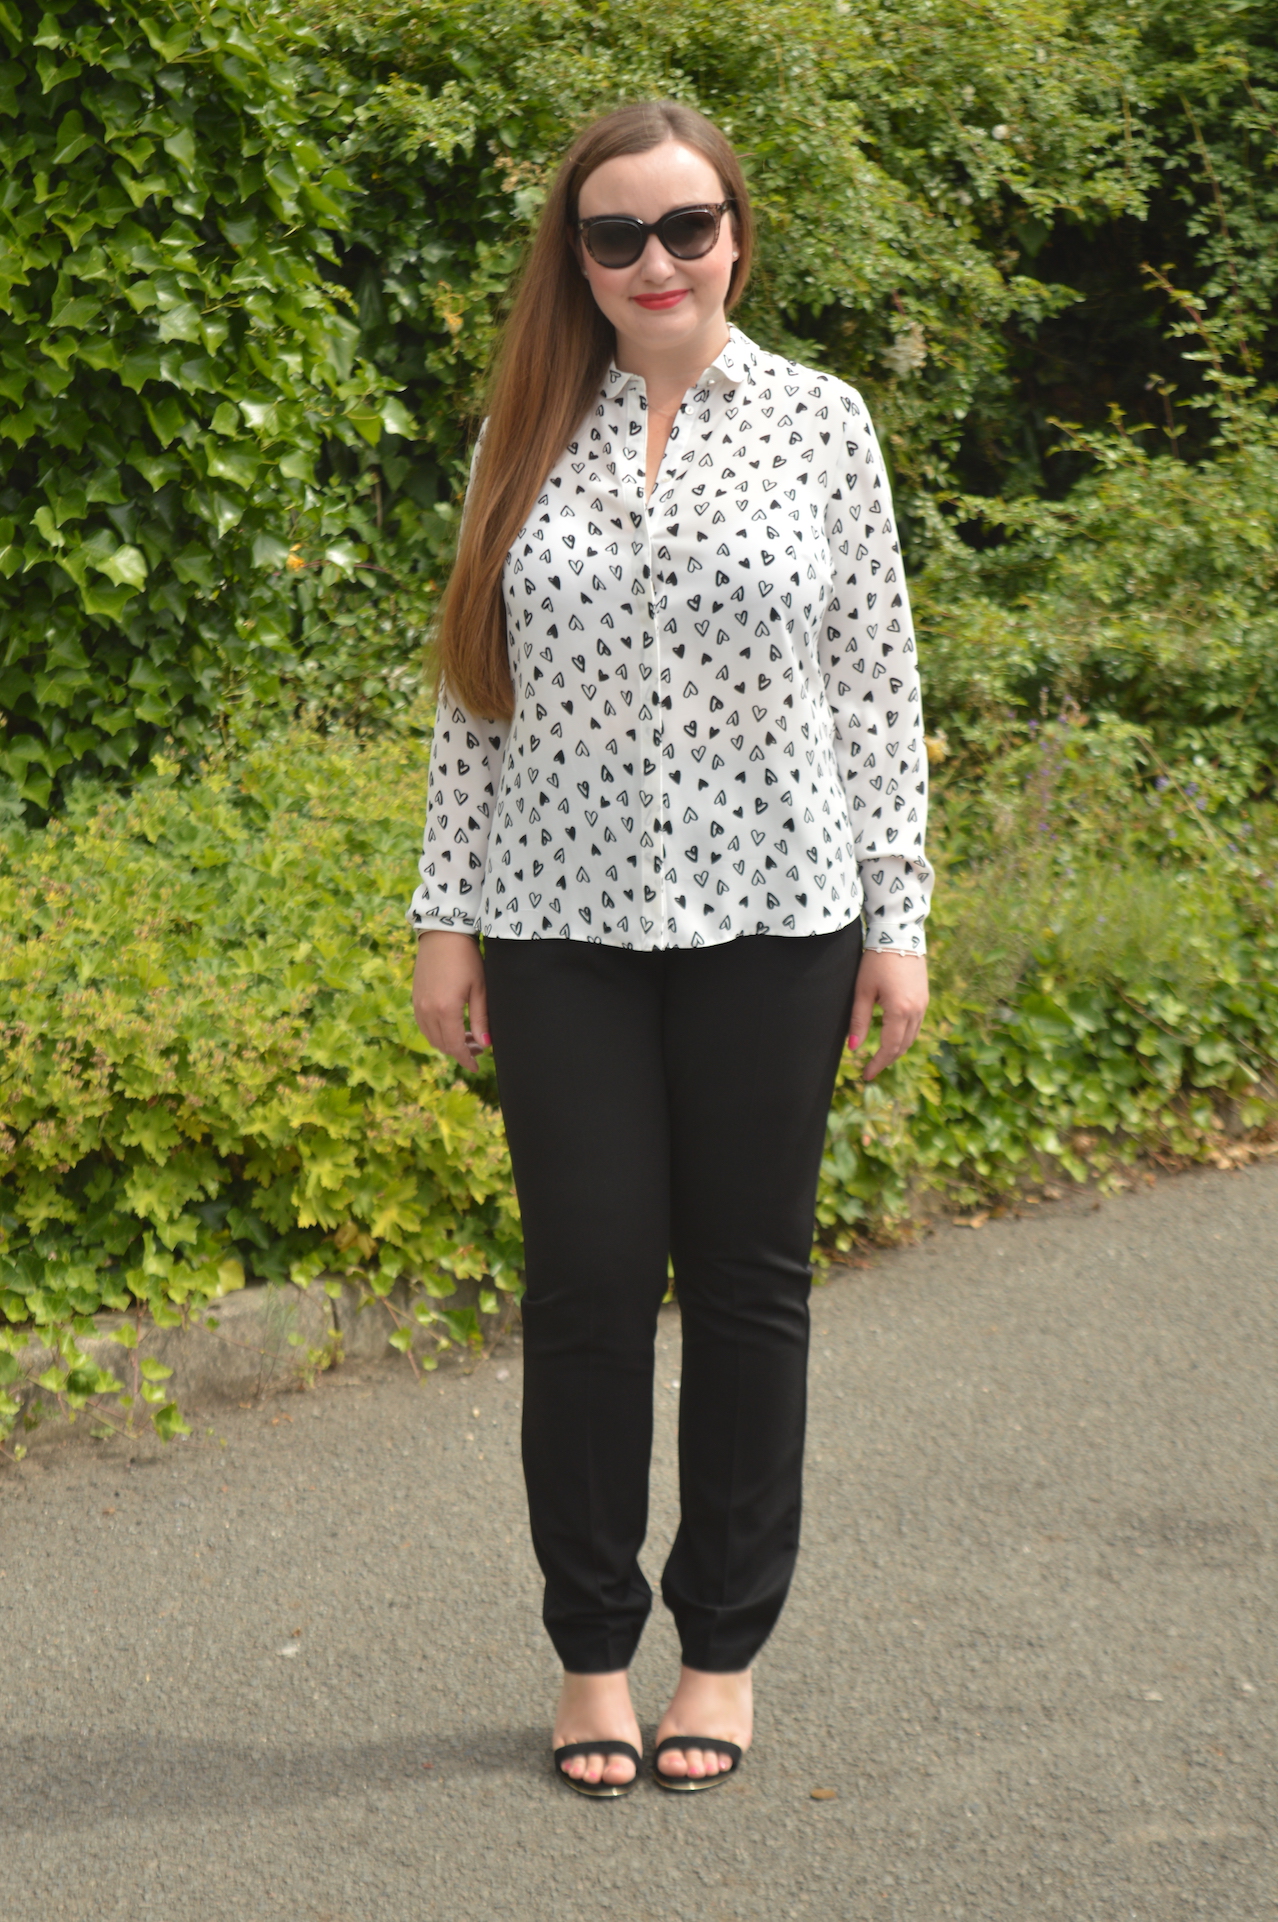 Matalan Heart Printed blouse and black trousers